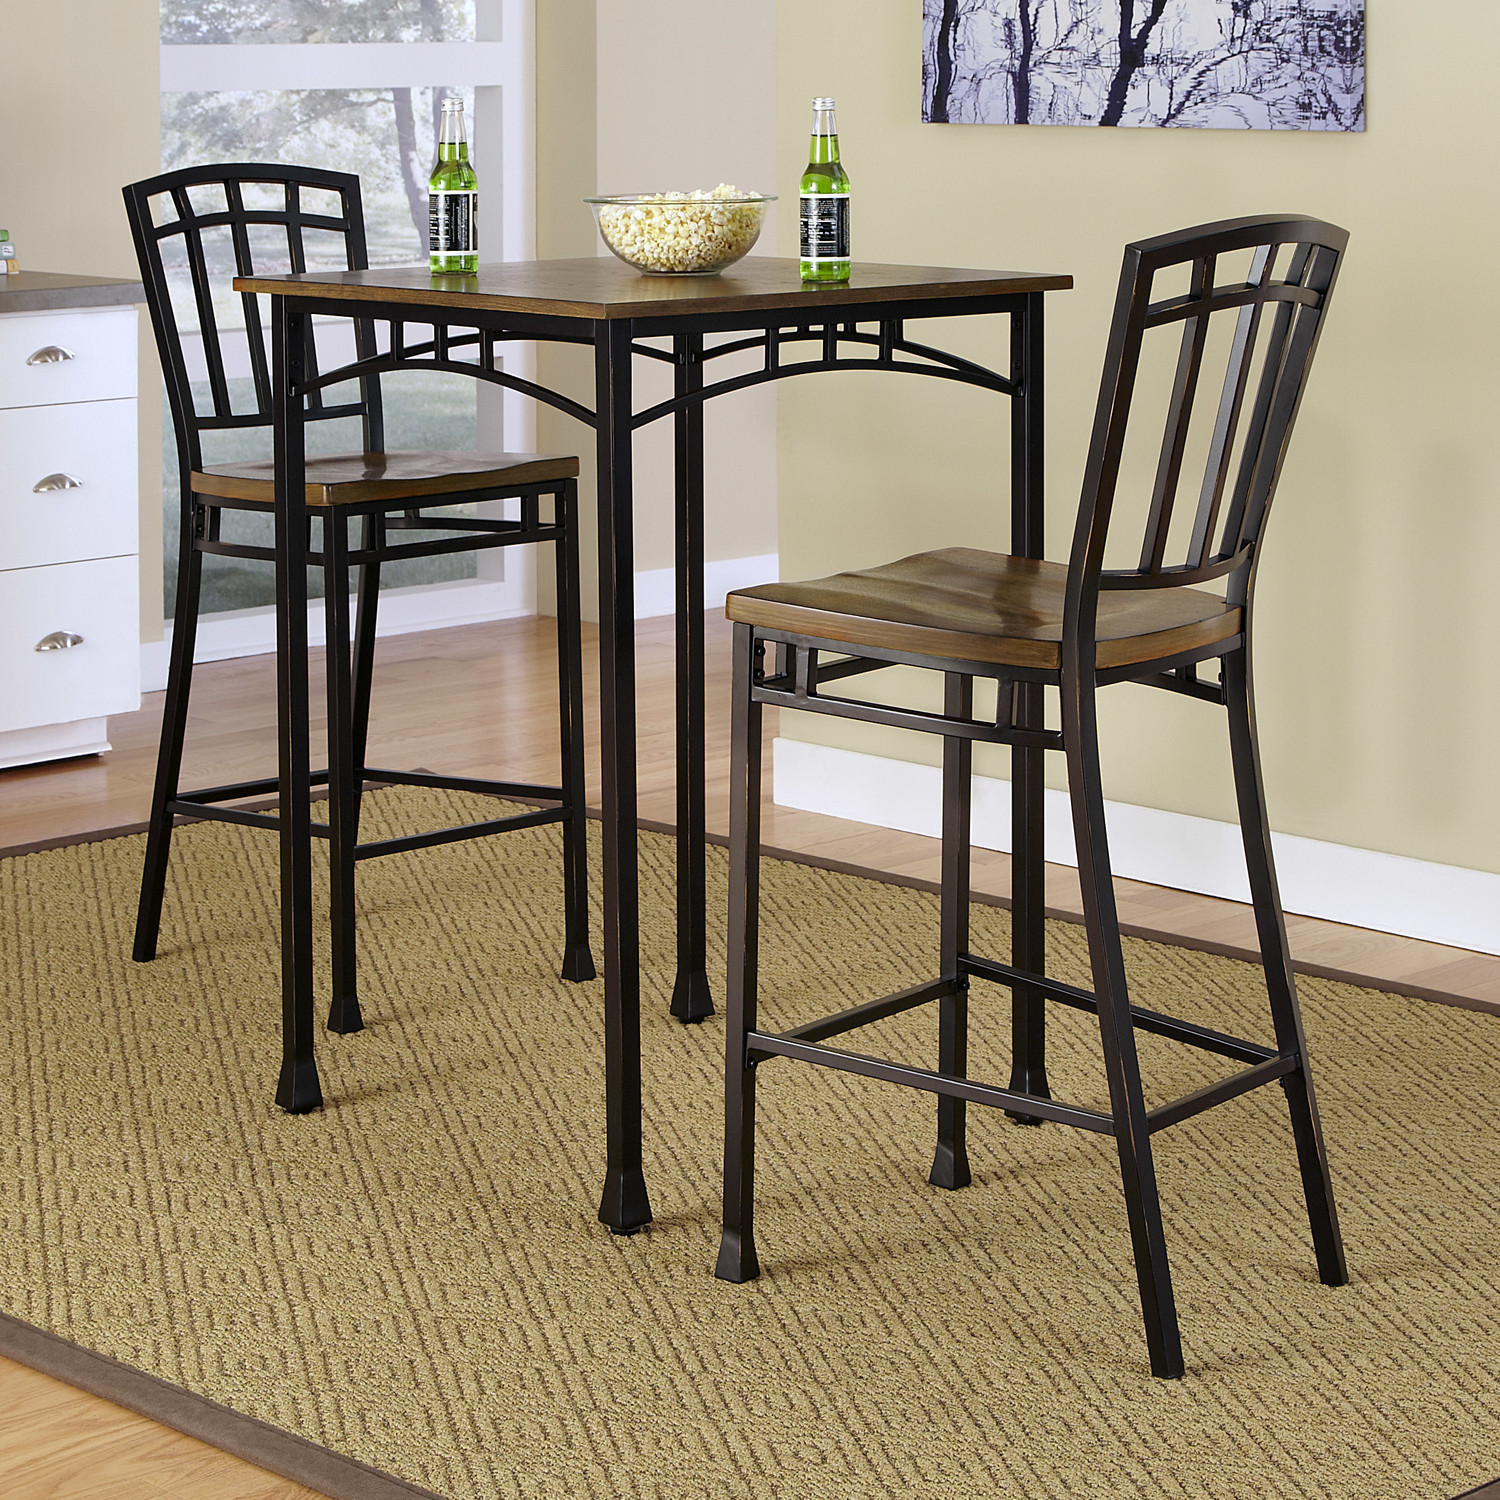 Small Bistro Tables for Kitchen Awesome From Classic and Simple to Modern Style Of Small Pub Table